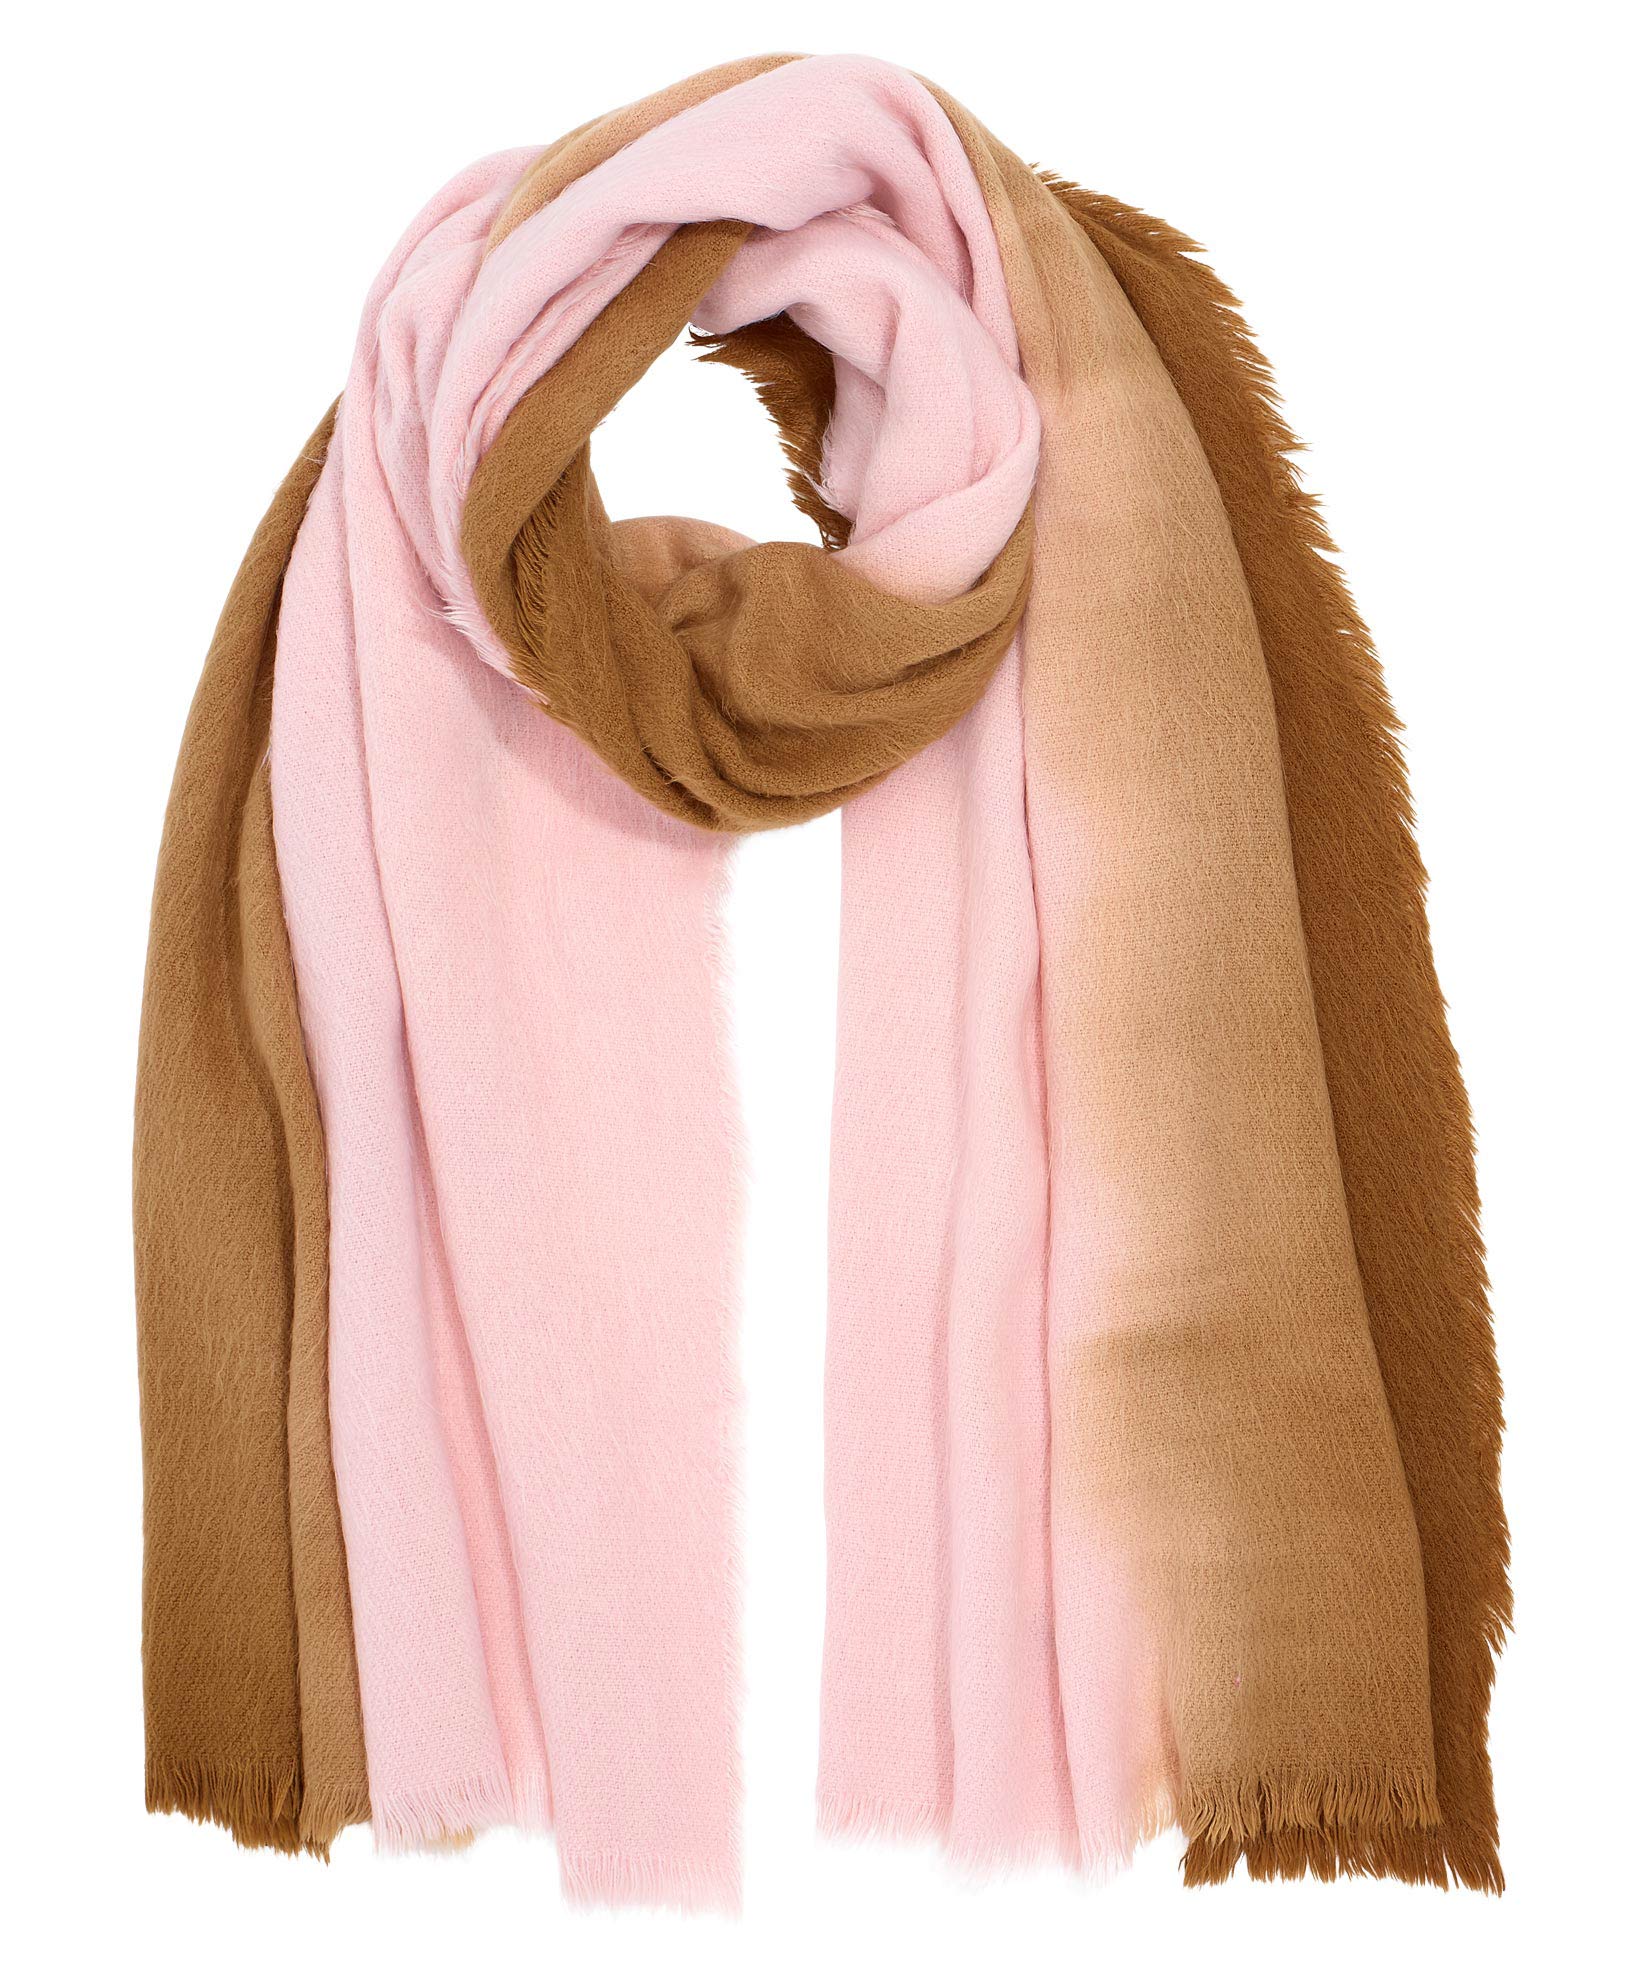 Brushed Ombre Scarf in color Copper